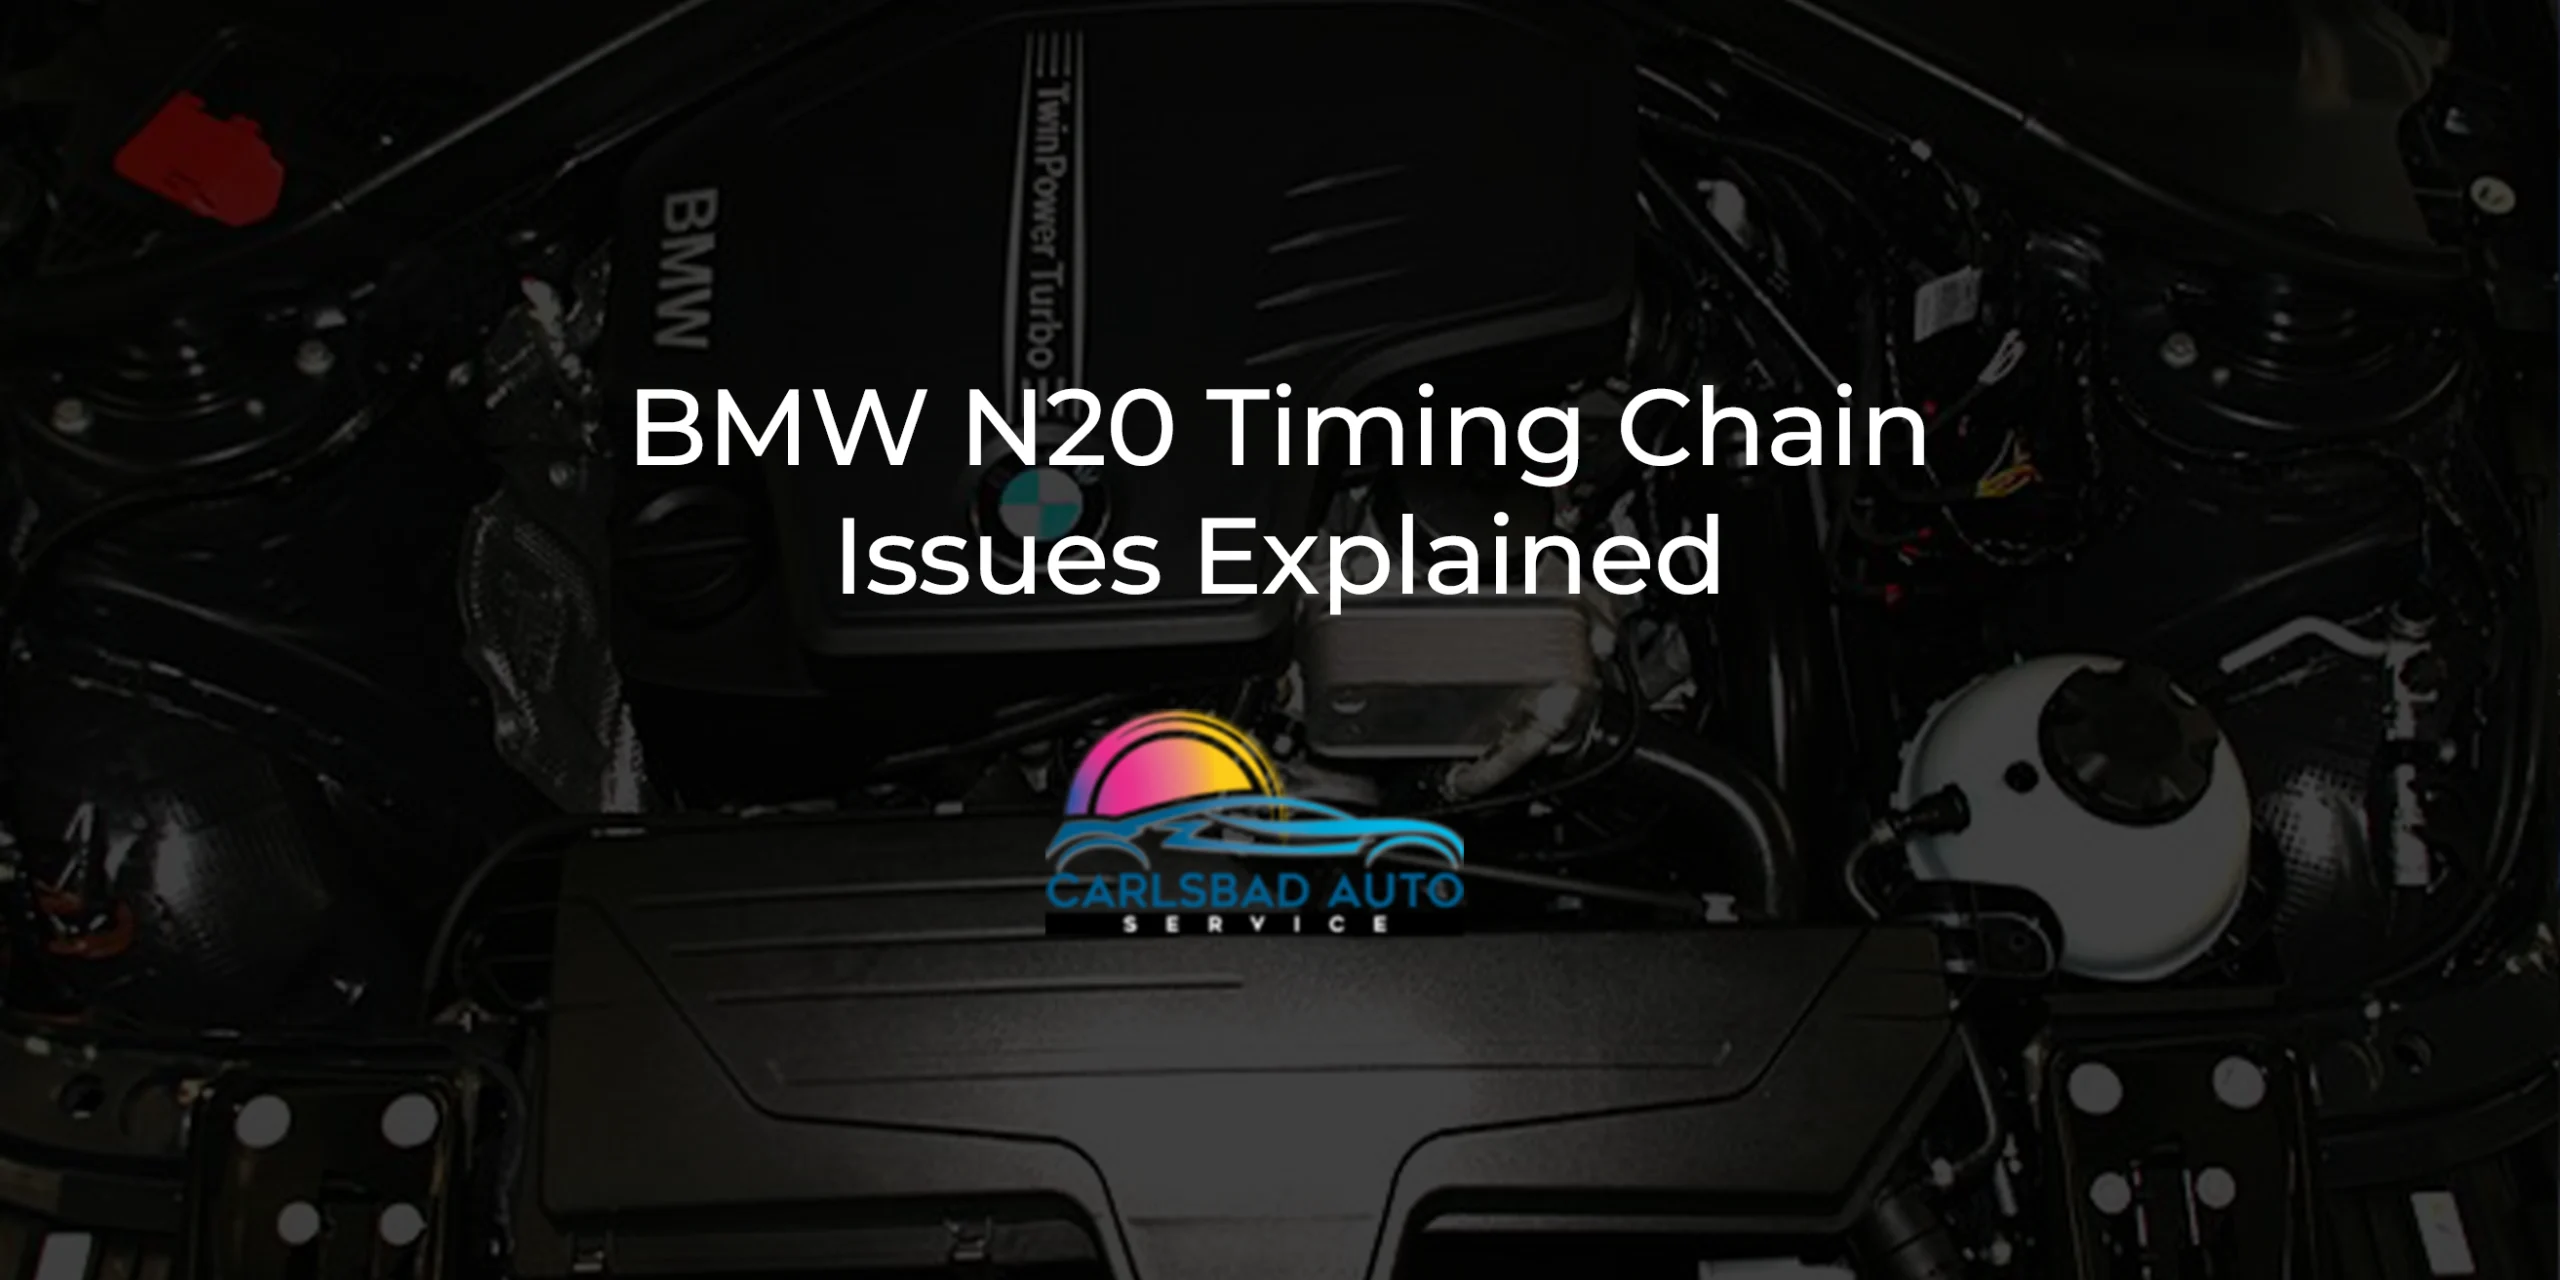 BMW N20 Timing Chain Issues Explained